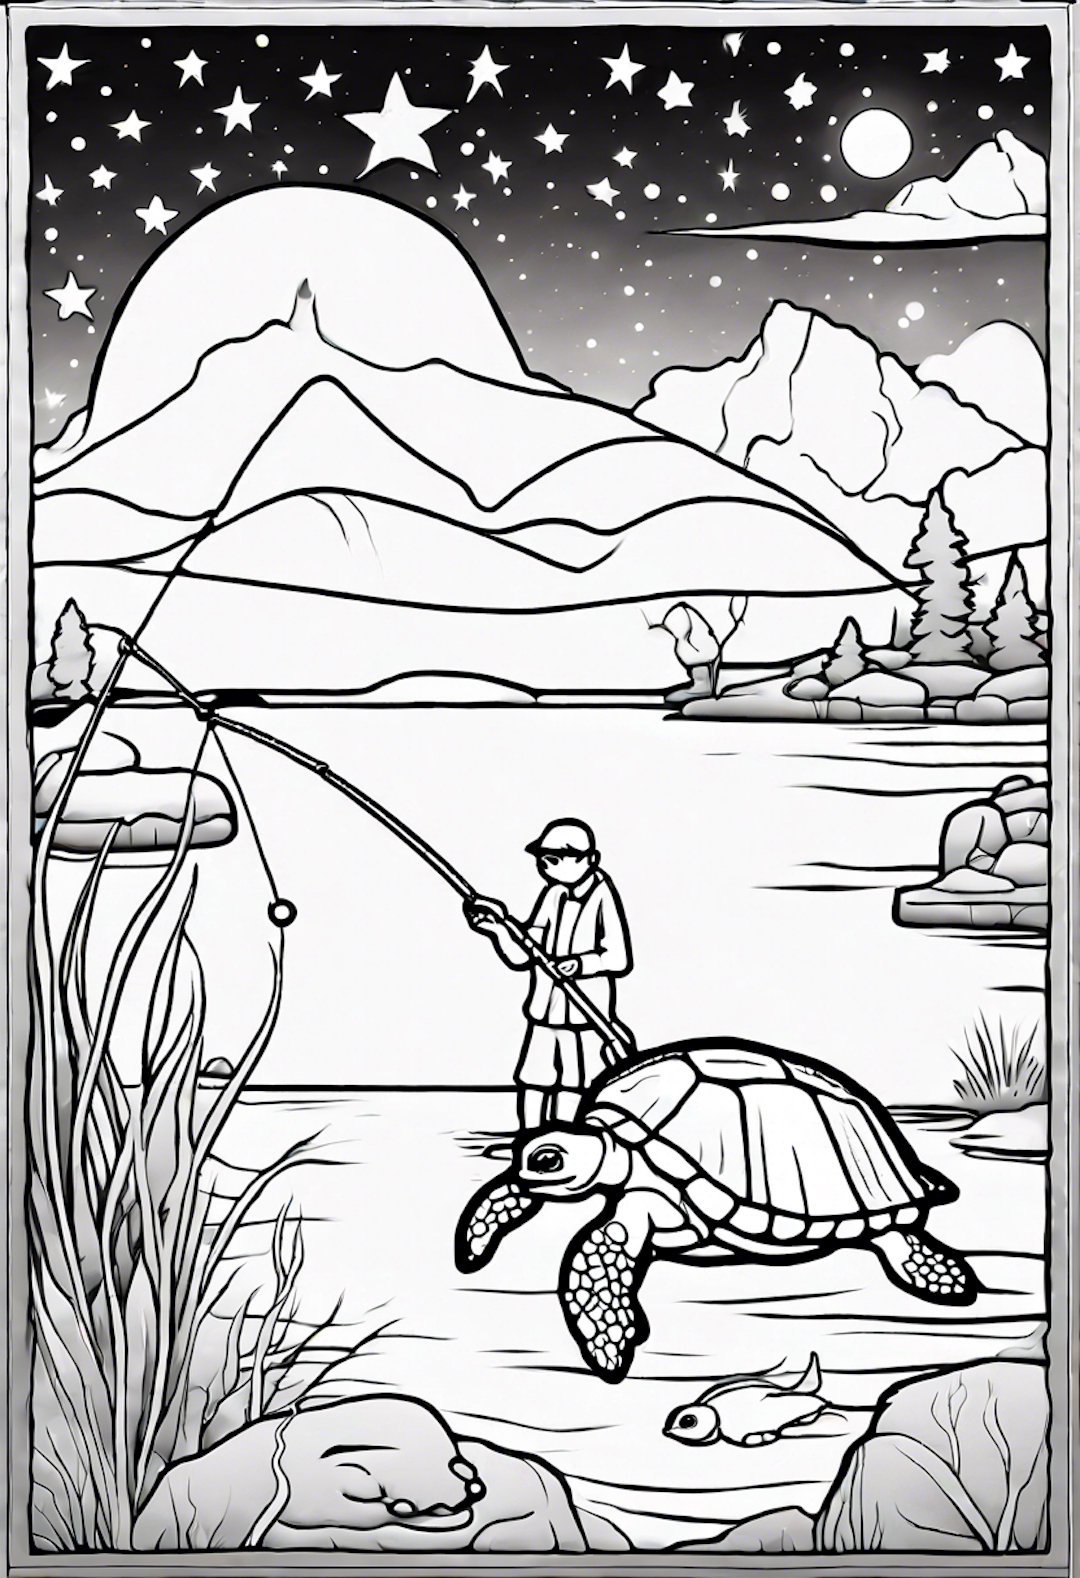 A Patient Star Fishing With A Slow Moving Turtle